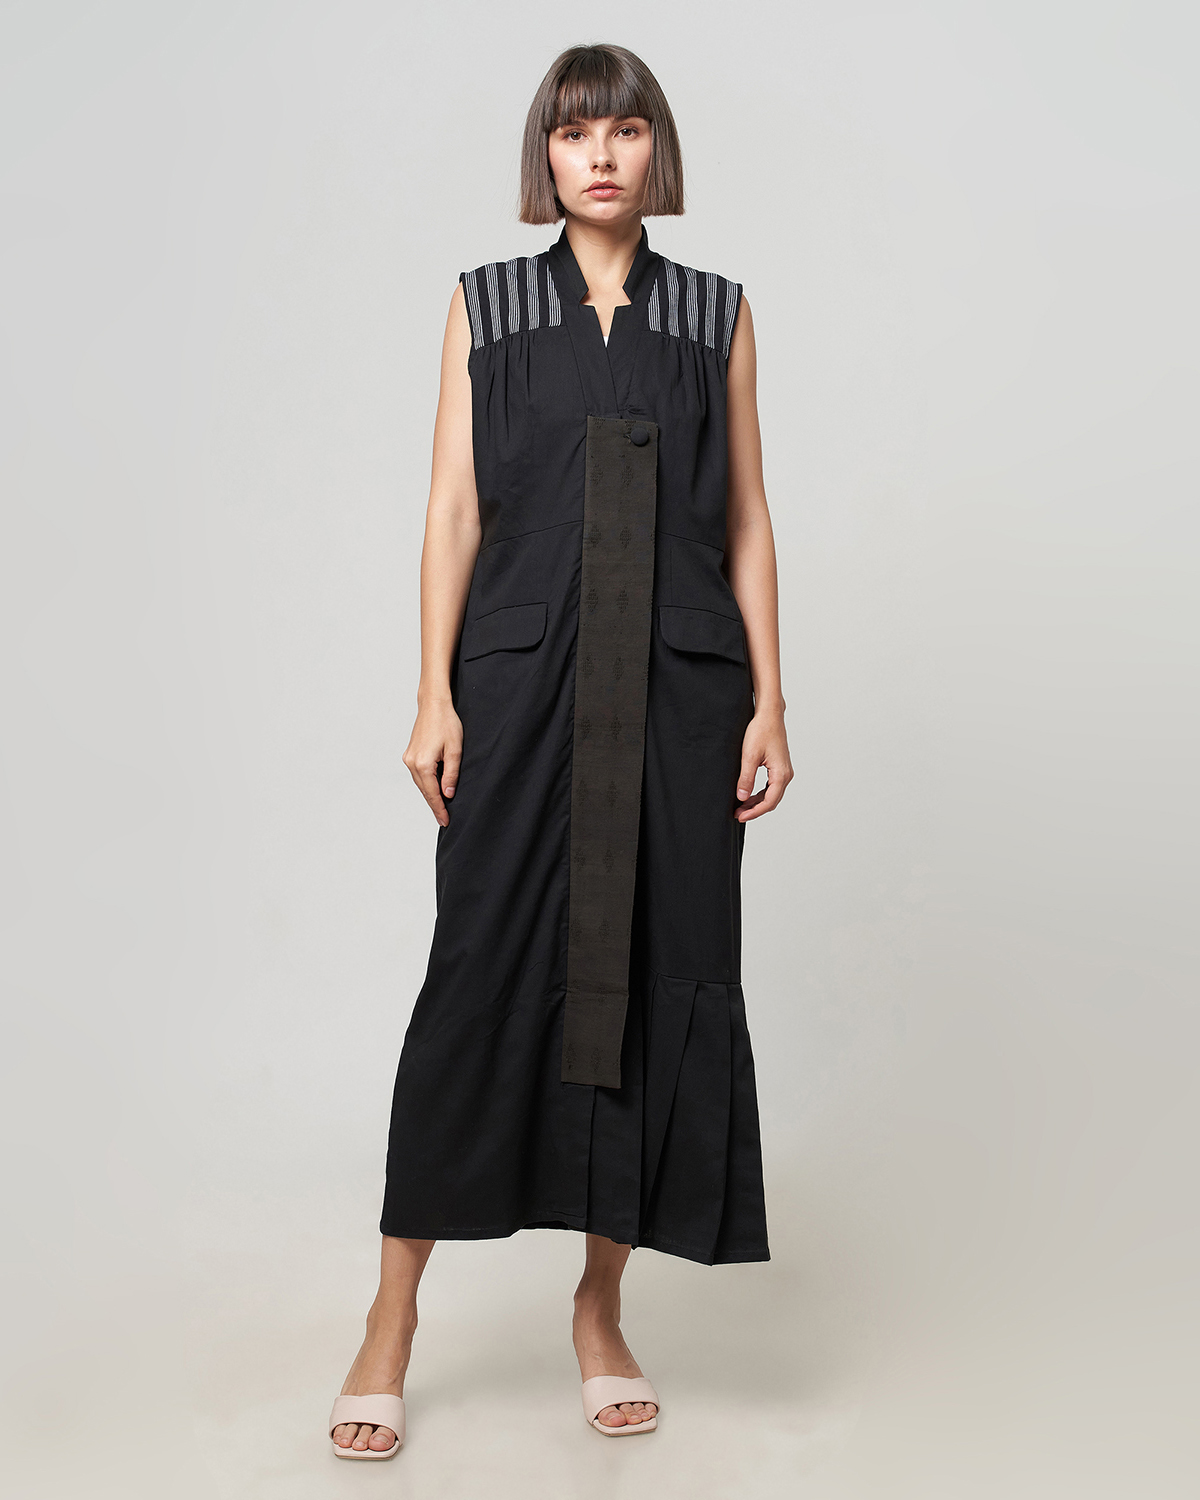 Black Sleeveless Outer Dress with Ikat